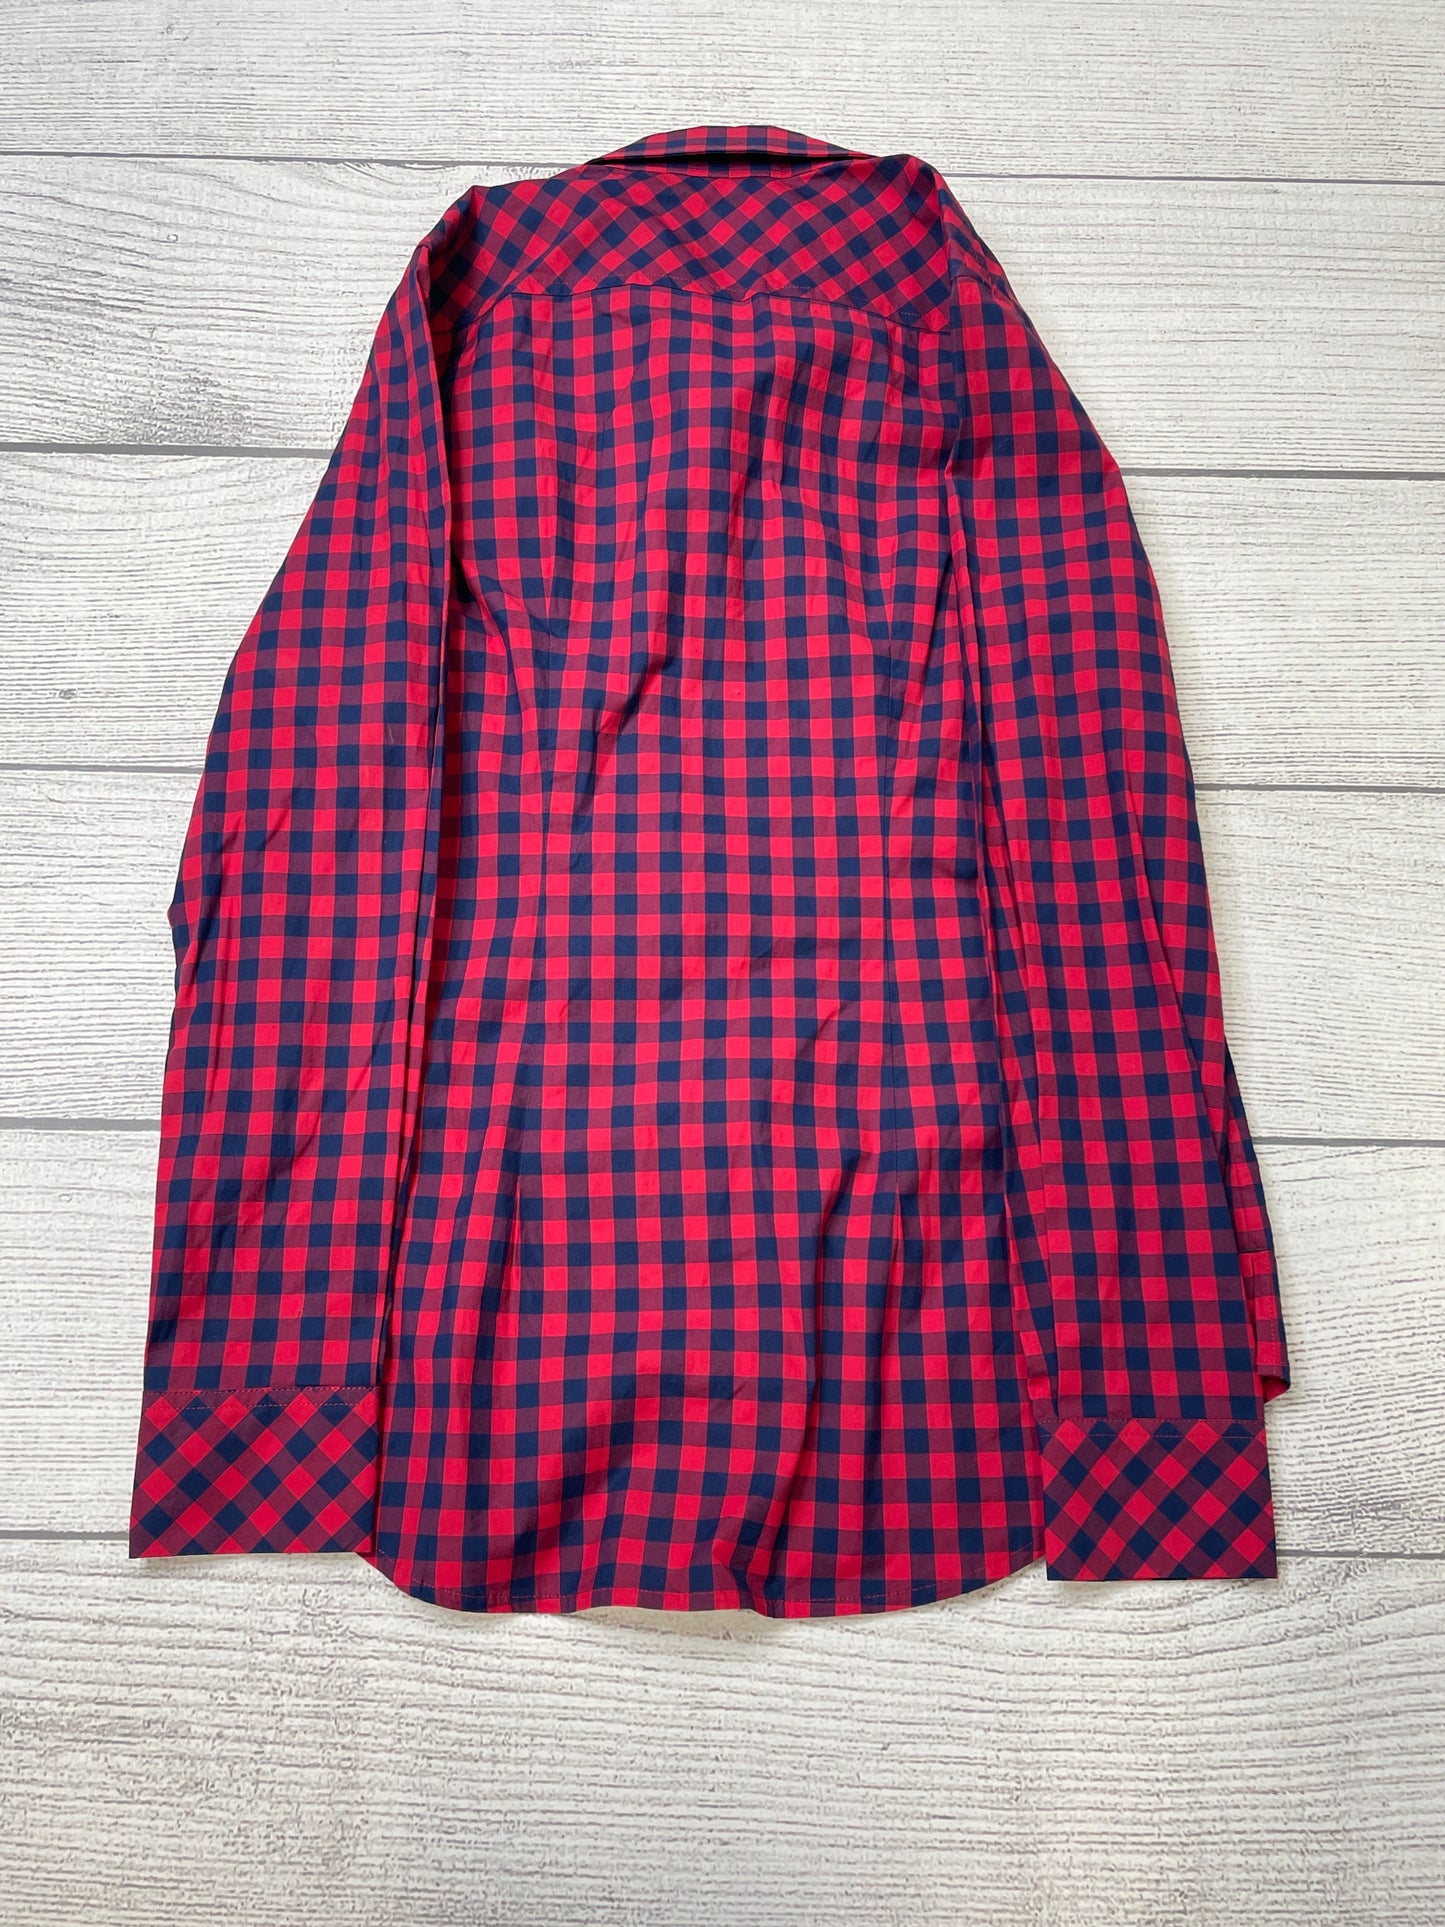 Red Blue Blouse Long Sleeve Vineyard Vines, Size Xs